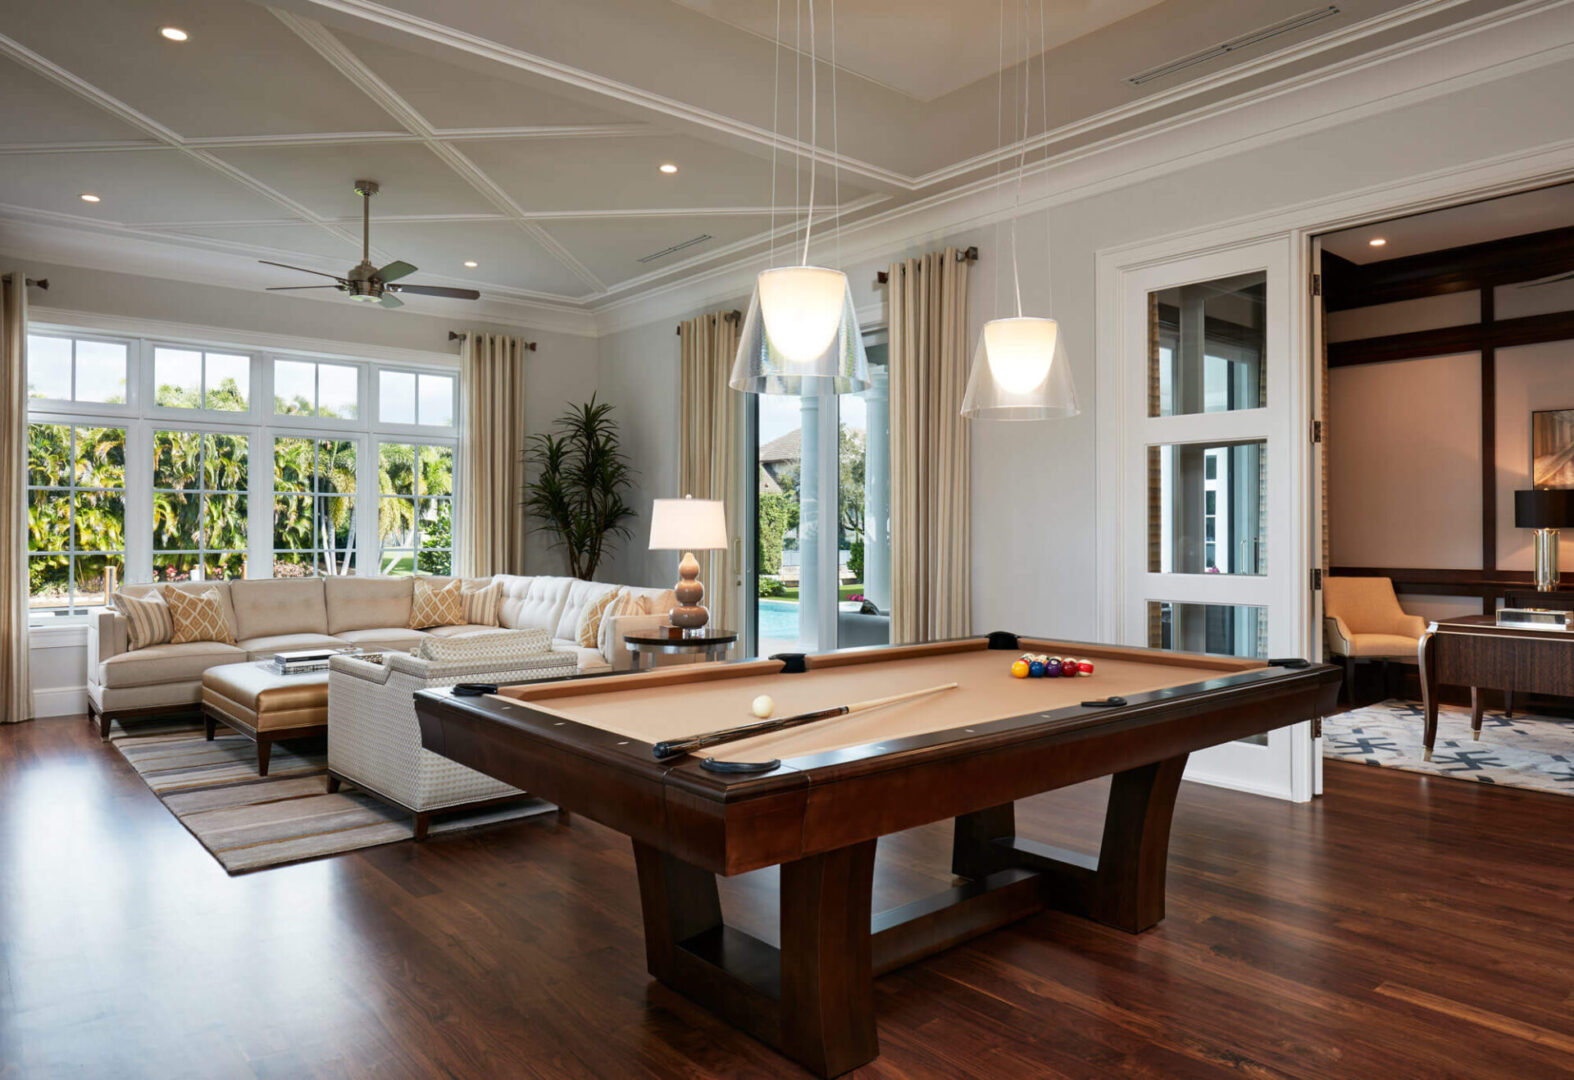 A pool table in the middle of a living room.